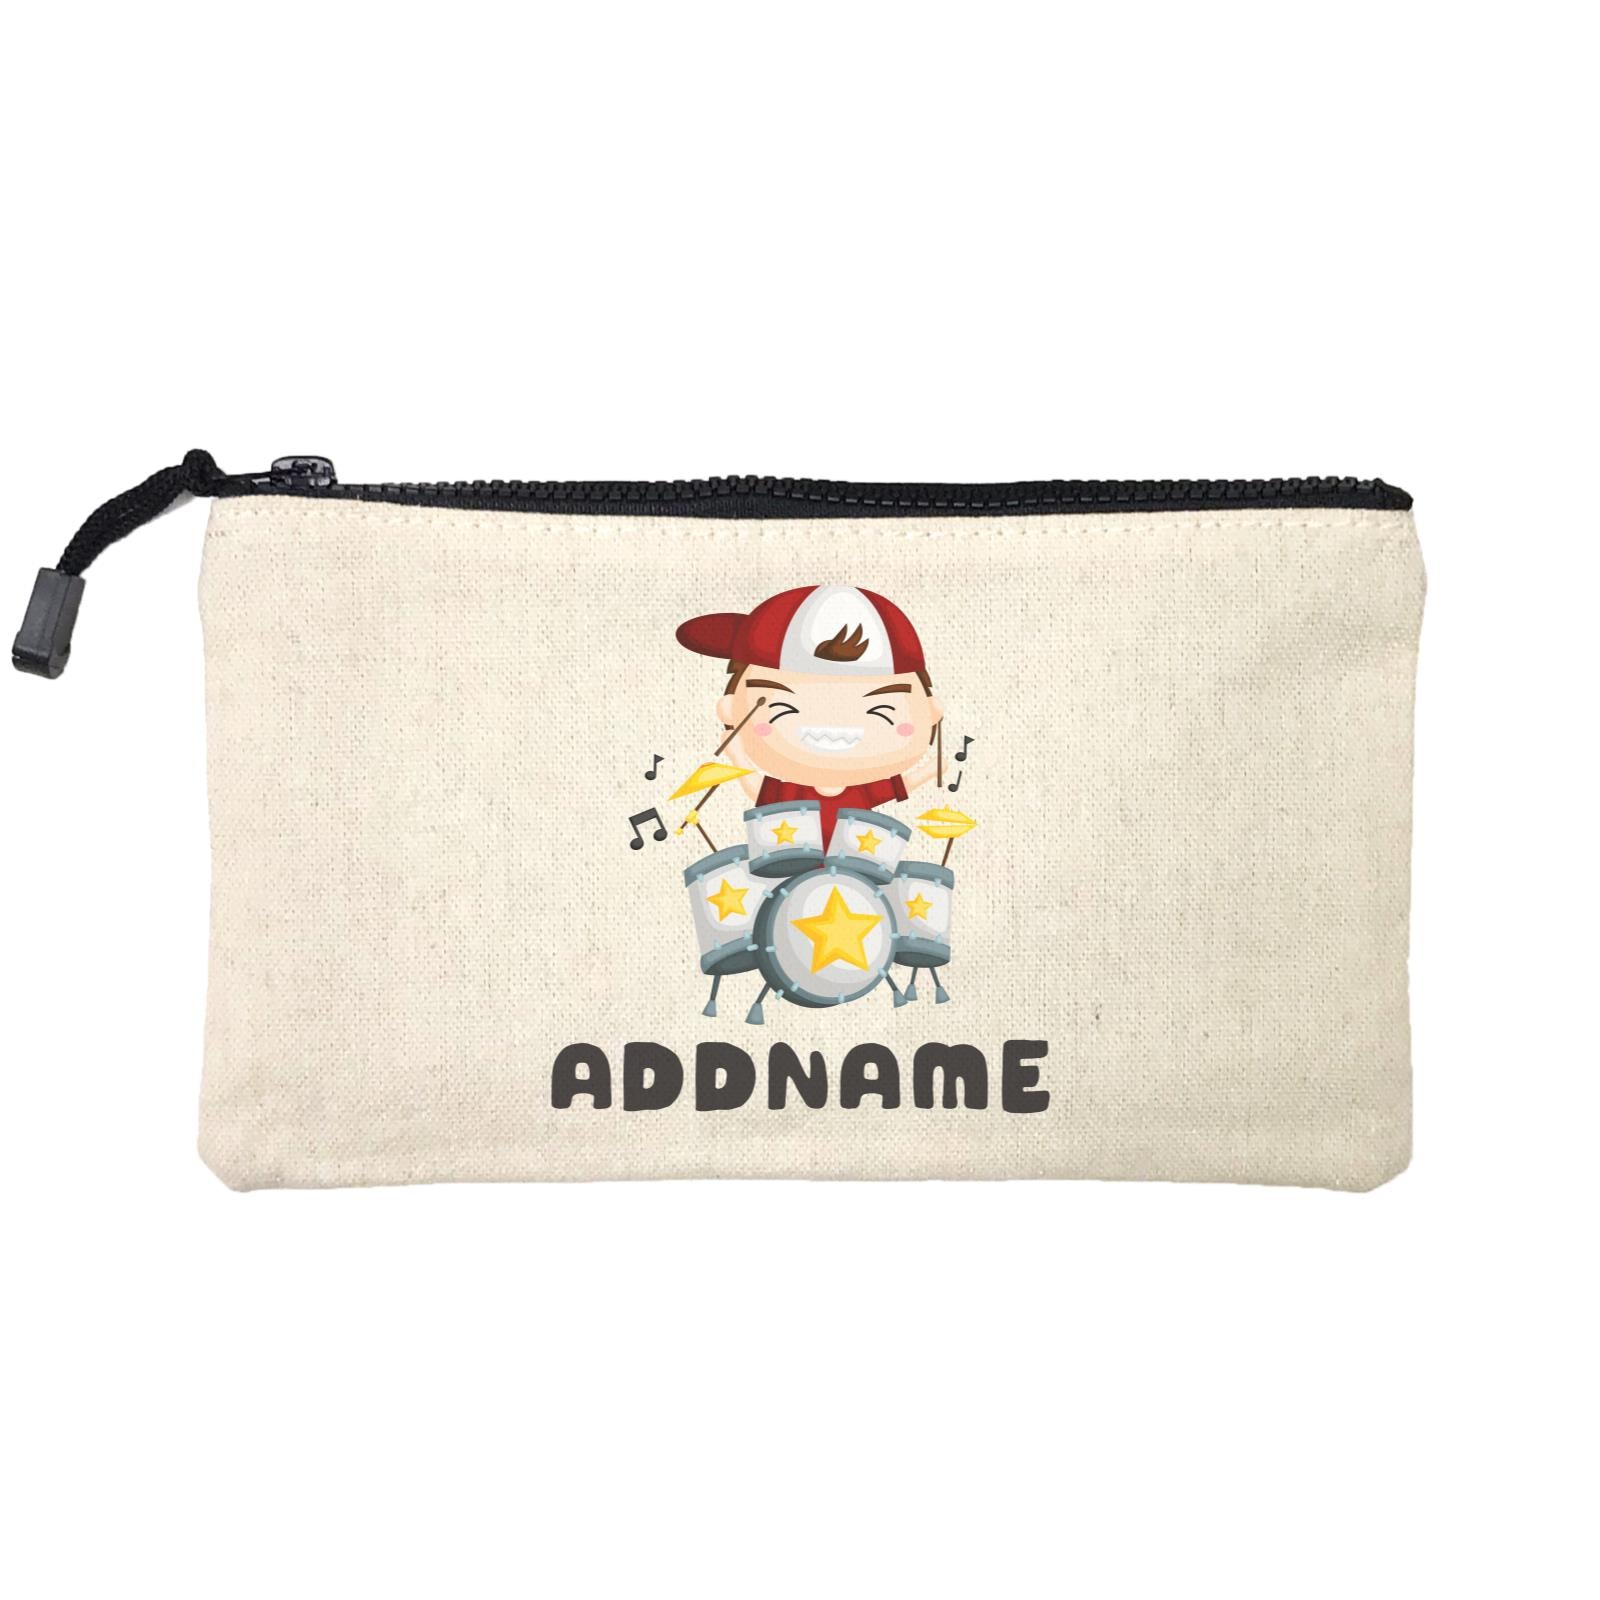 Birthday Music Band Boy Playing Drums Addname Mini Accessories Stationery Pouch